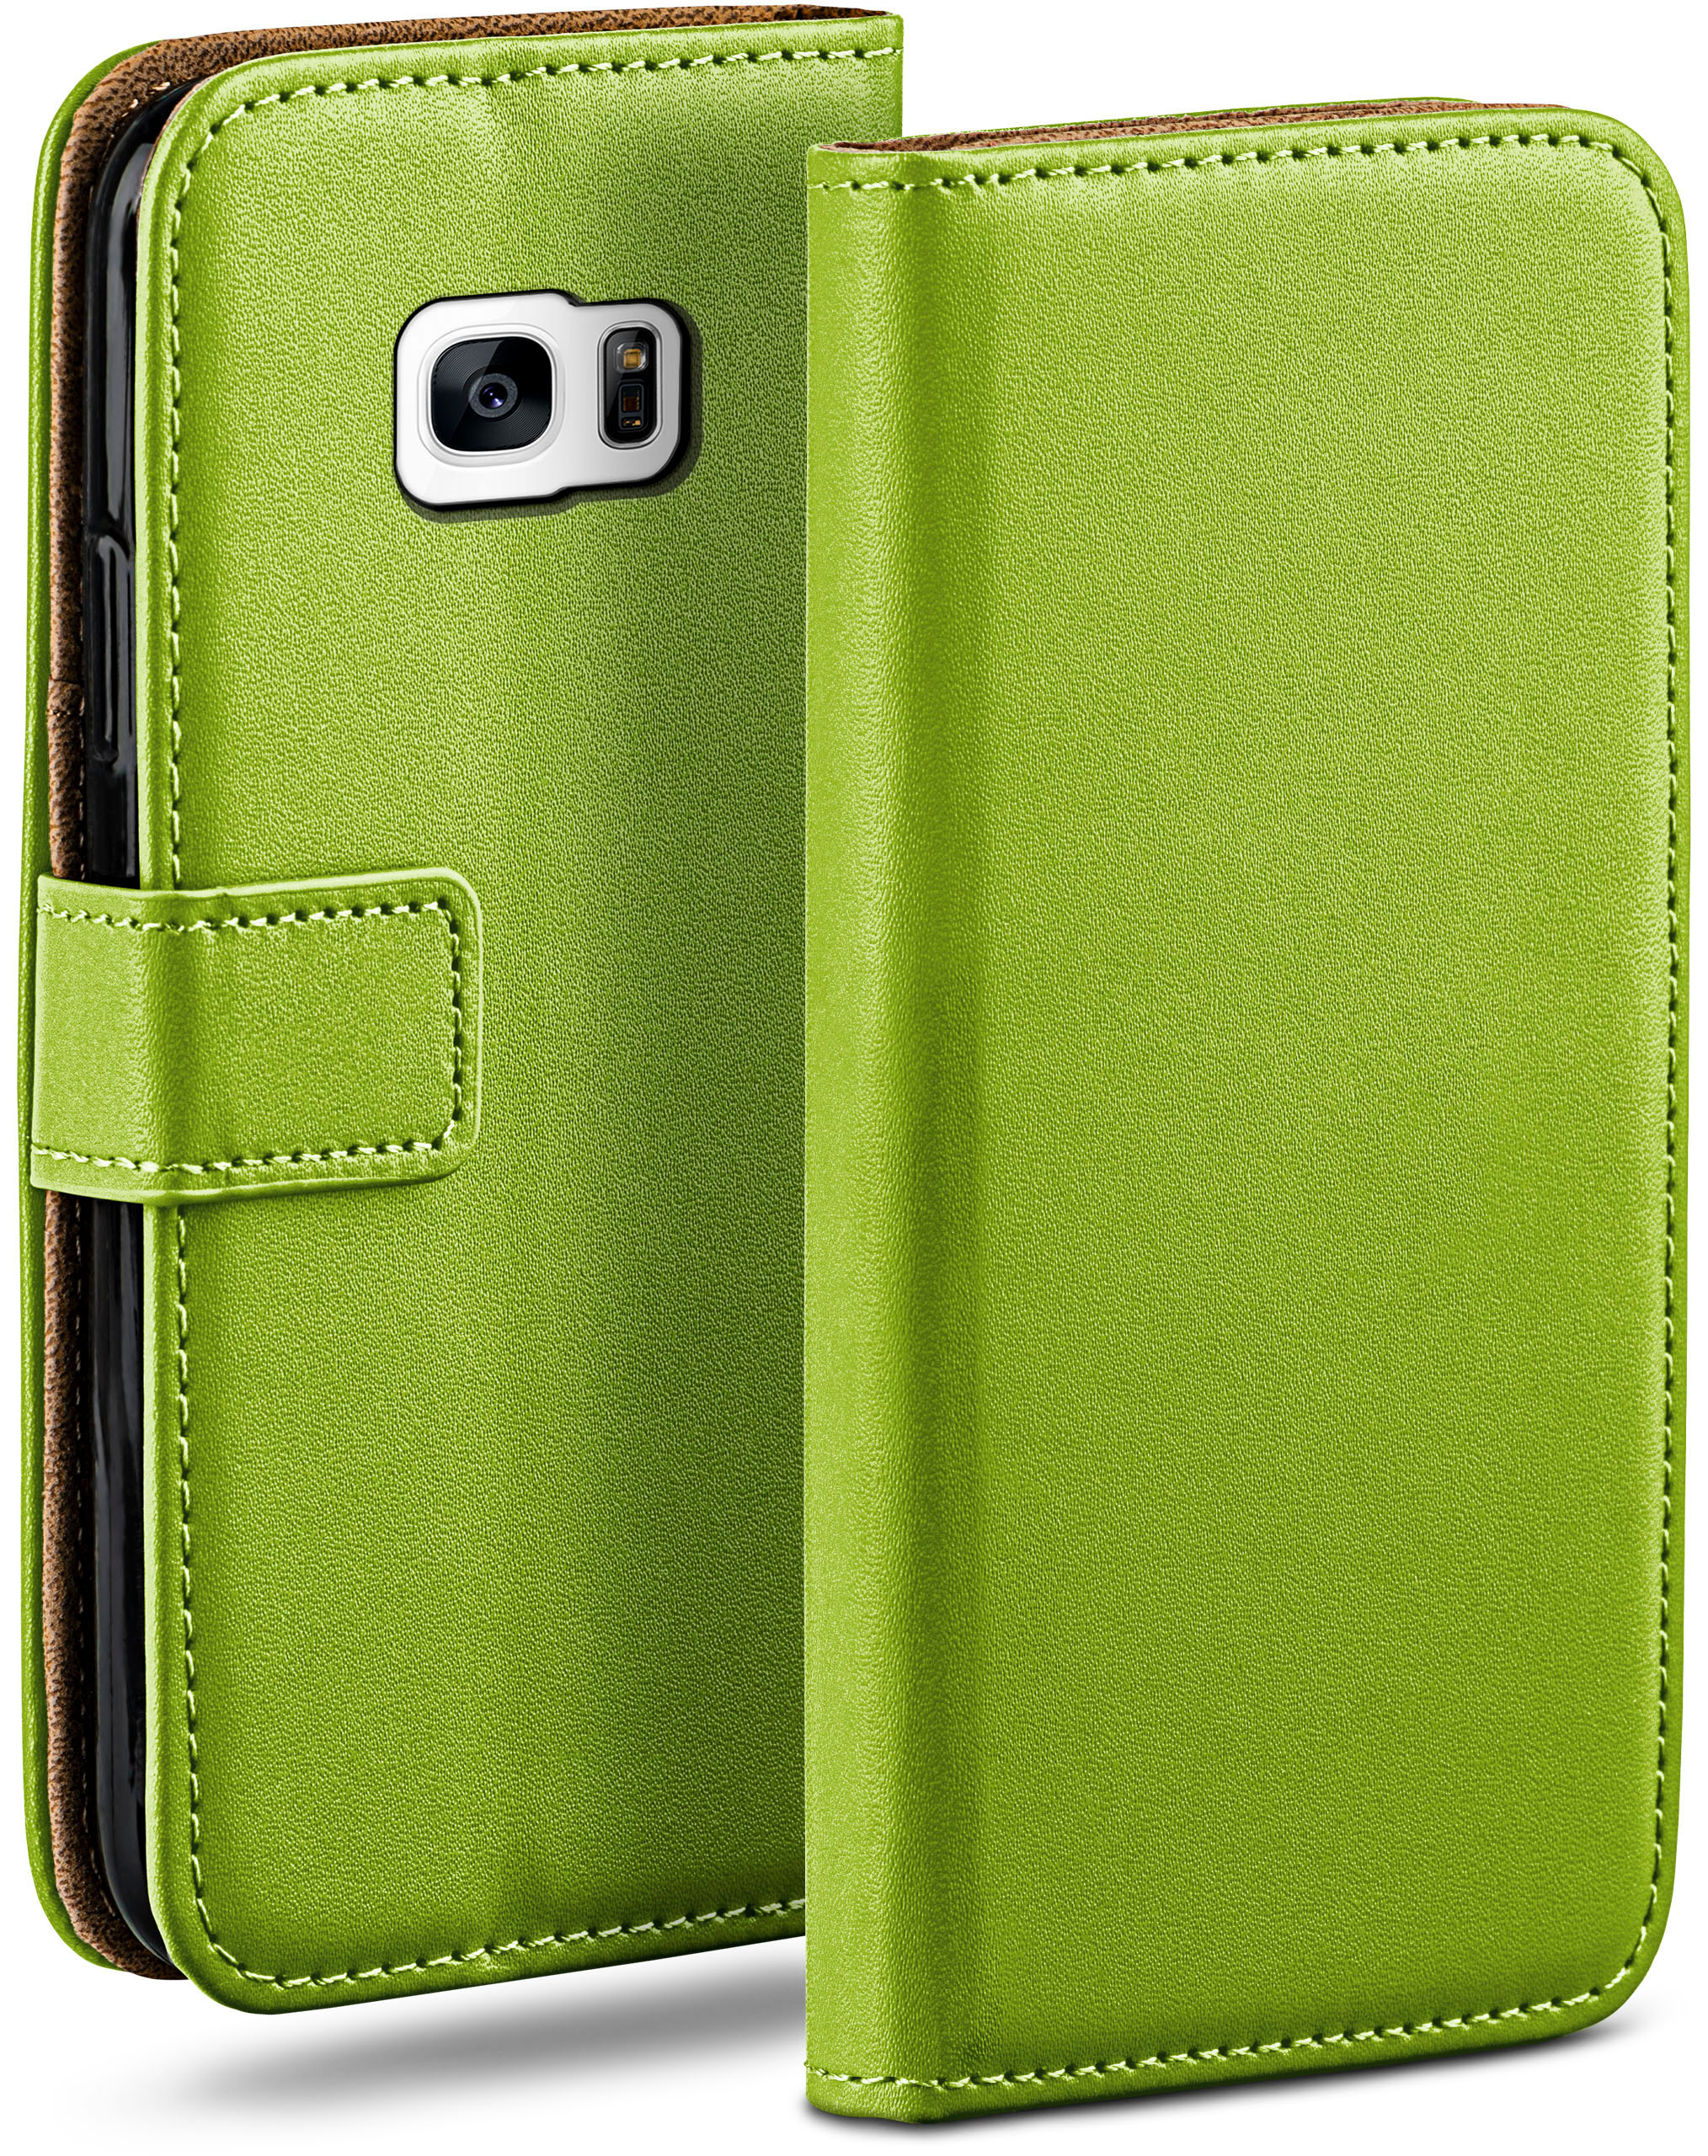 MOEX Book Galaxy Case, Lime-Green Edge, Bookcover, Samsung, S7